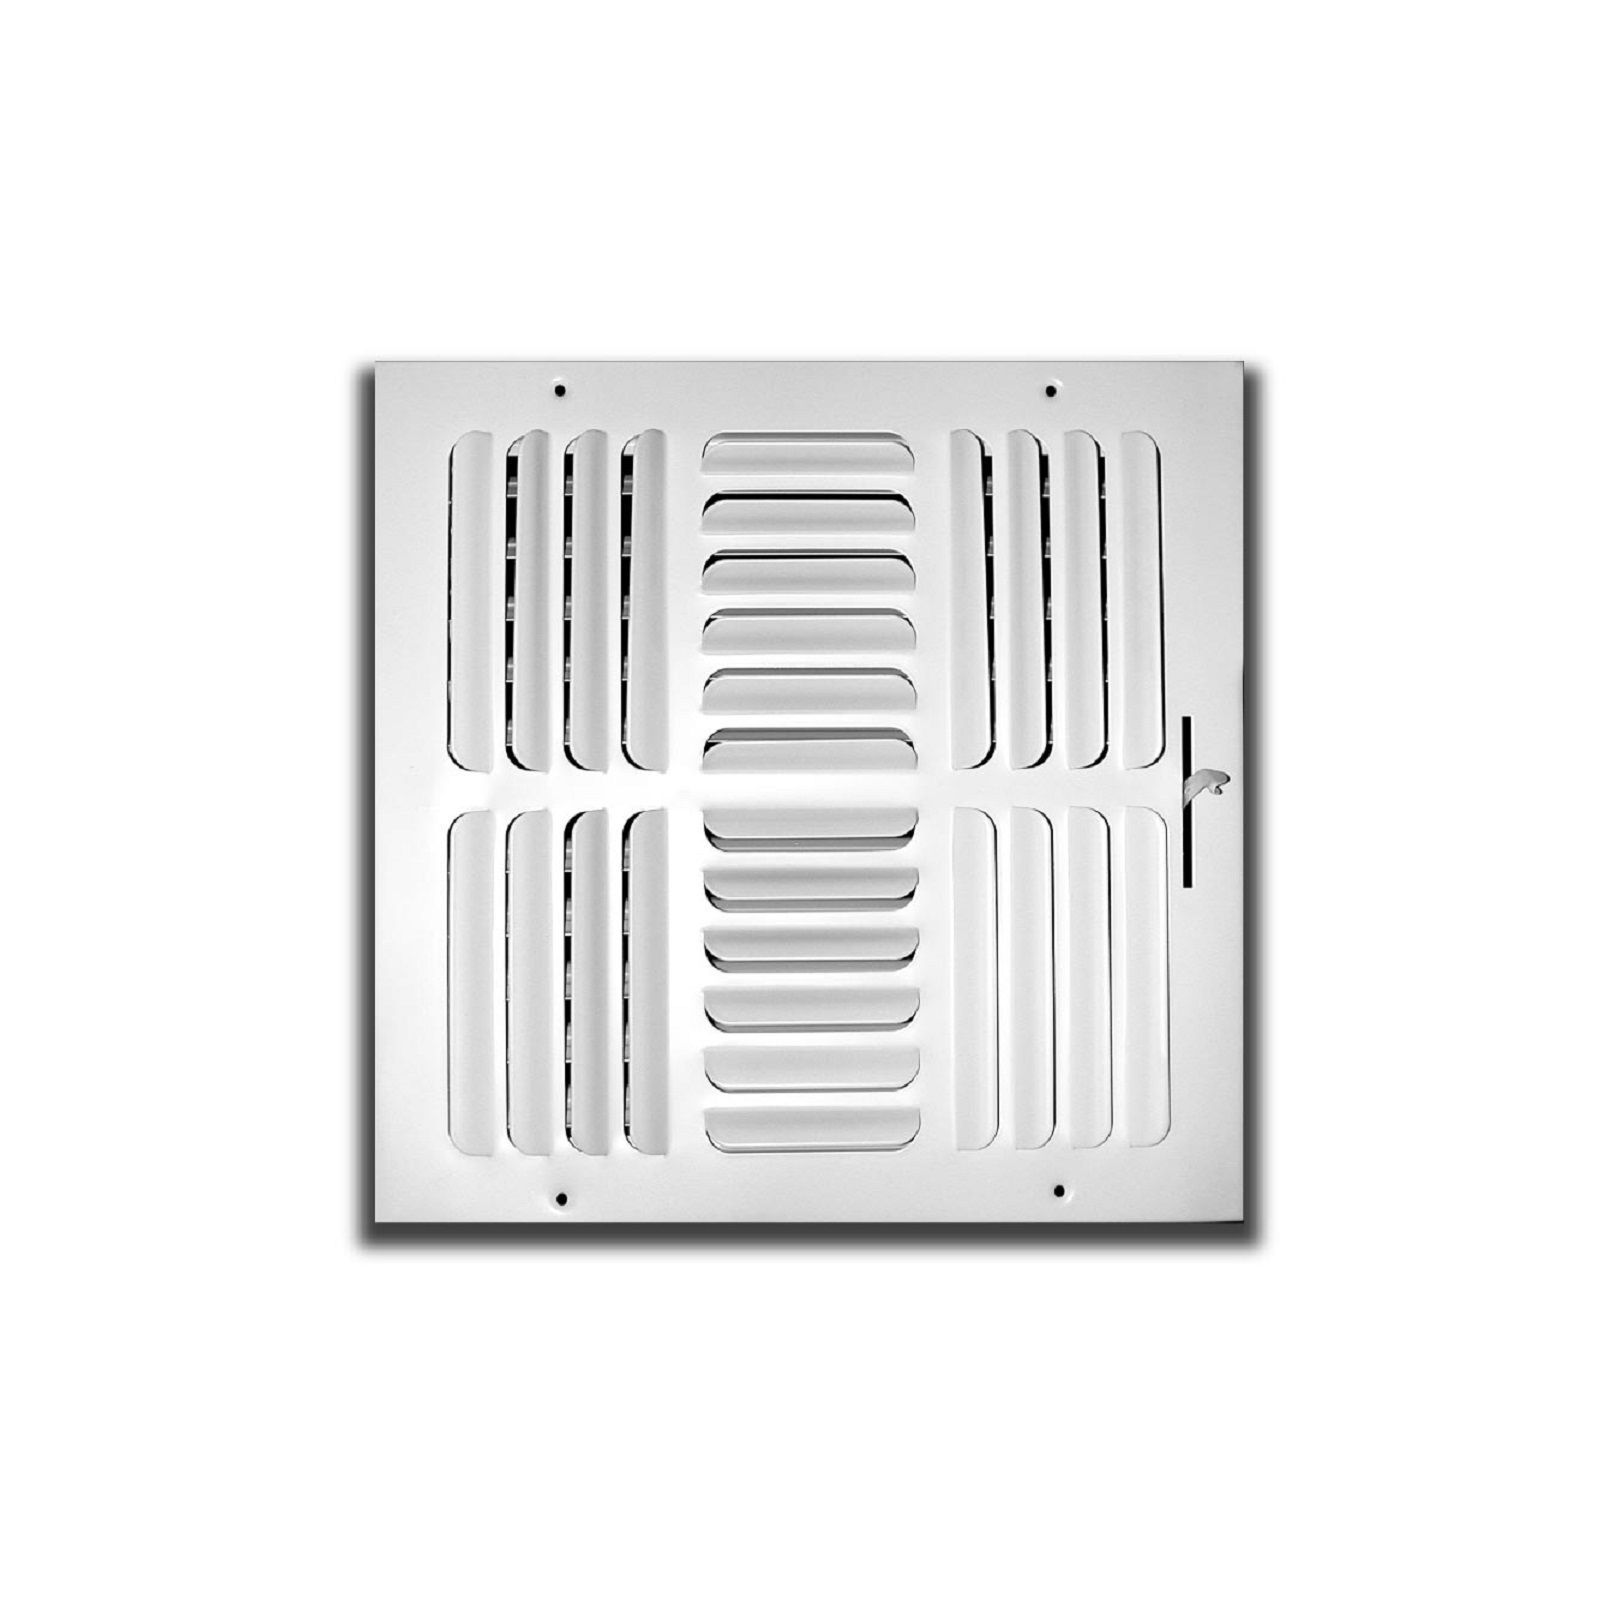 TRUaire 404M 06X06 - Fixed Curved Blade Wall/Ceiling Register With Multi Shutter Damper, 4-Way, White, 06" X 06"